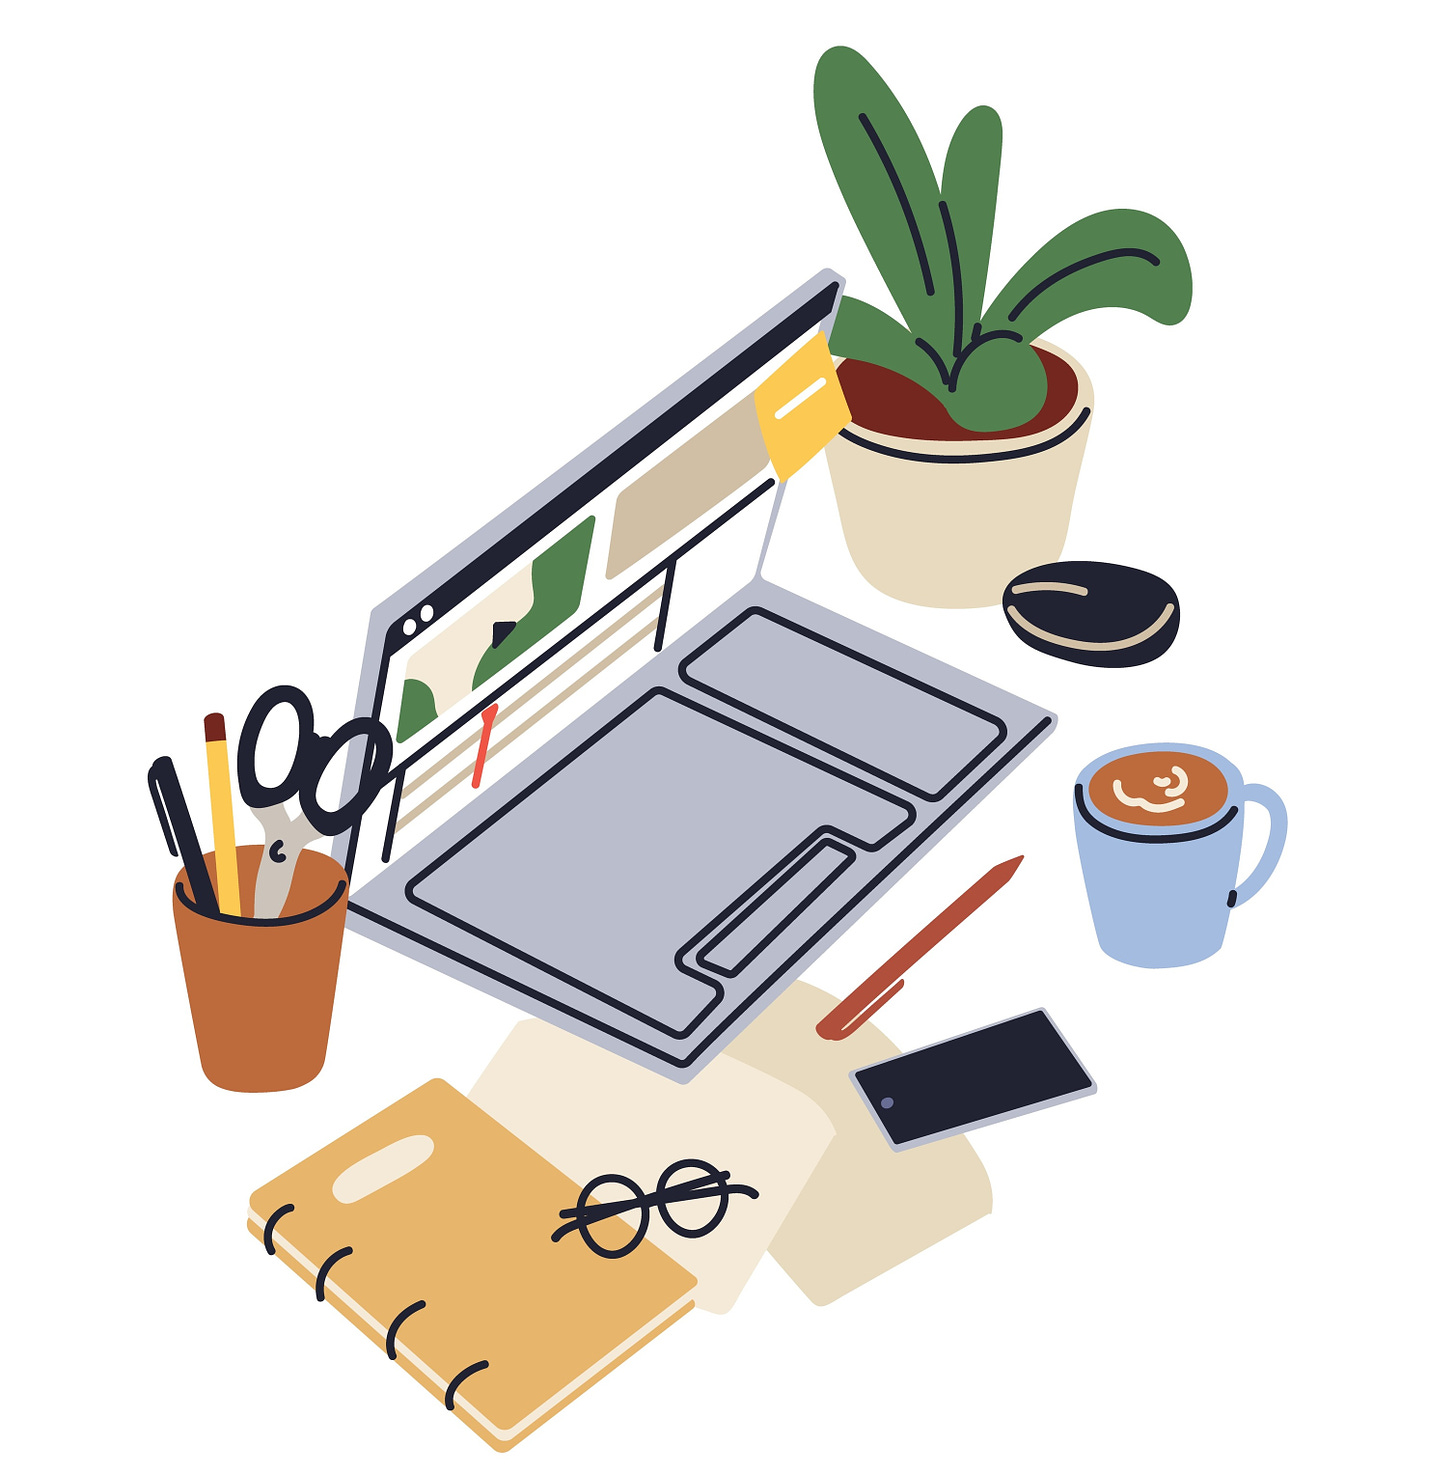 Digital drawing of a laptop surrounded by paper, glasses, a hot drink, a mouse, and cup of office supplies.